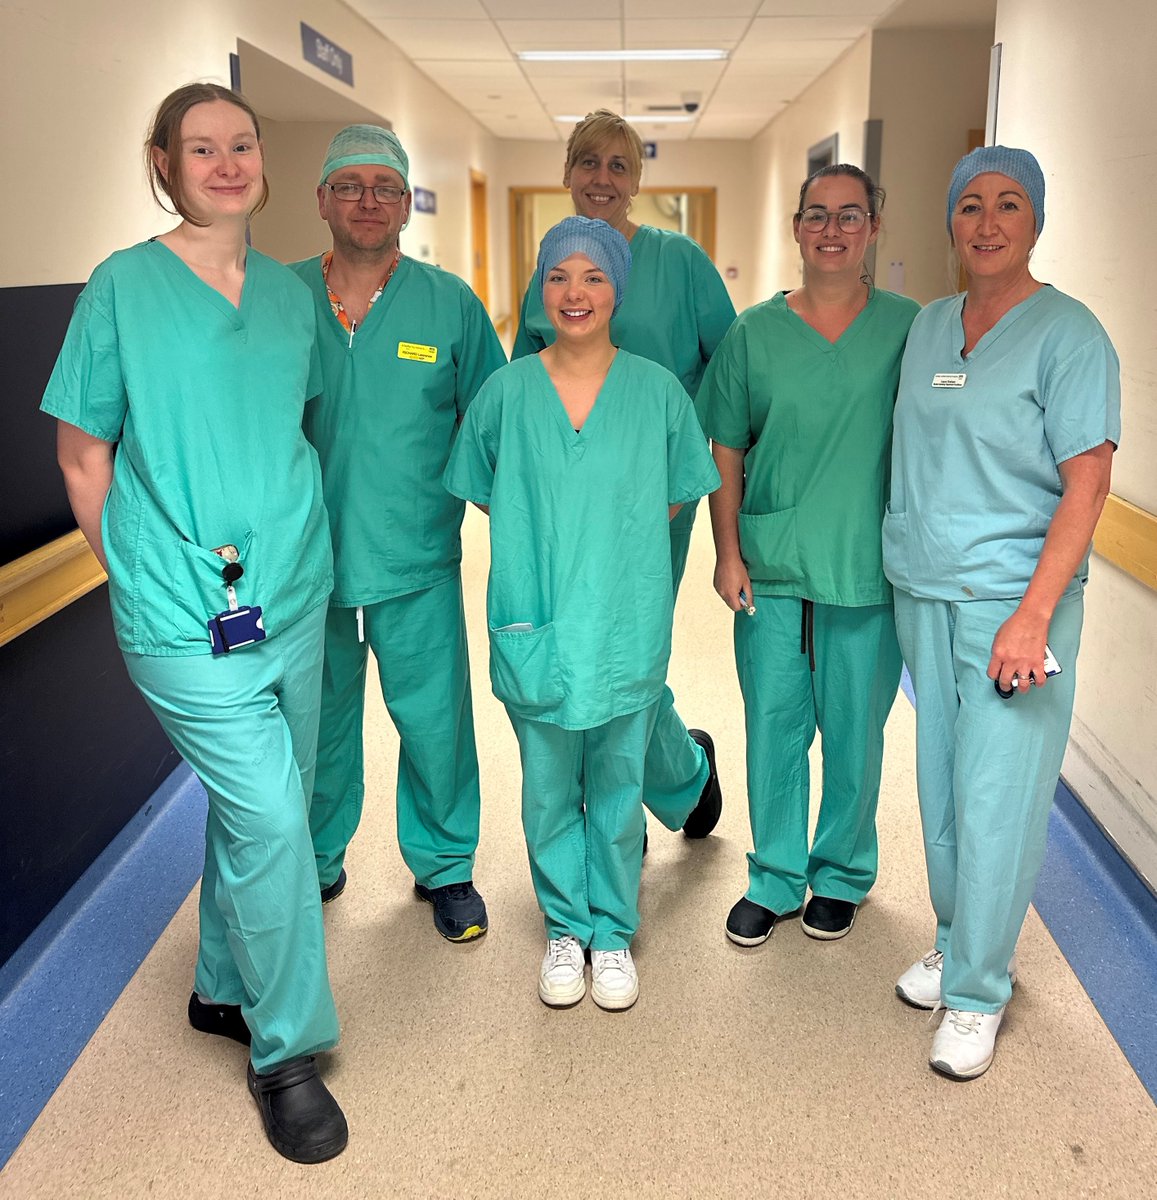 Today we celebrate #ODPDay👏 Our fantastic Operating Department Practitioners have a diverse range of skills across all main areas of theatre, including anaesthetics, scrub and recovery. ODPs are highly skilled and often hidden heroes of #TeamJubilee Thank you for all that you do